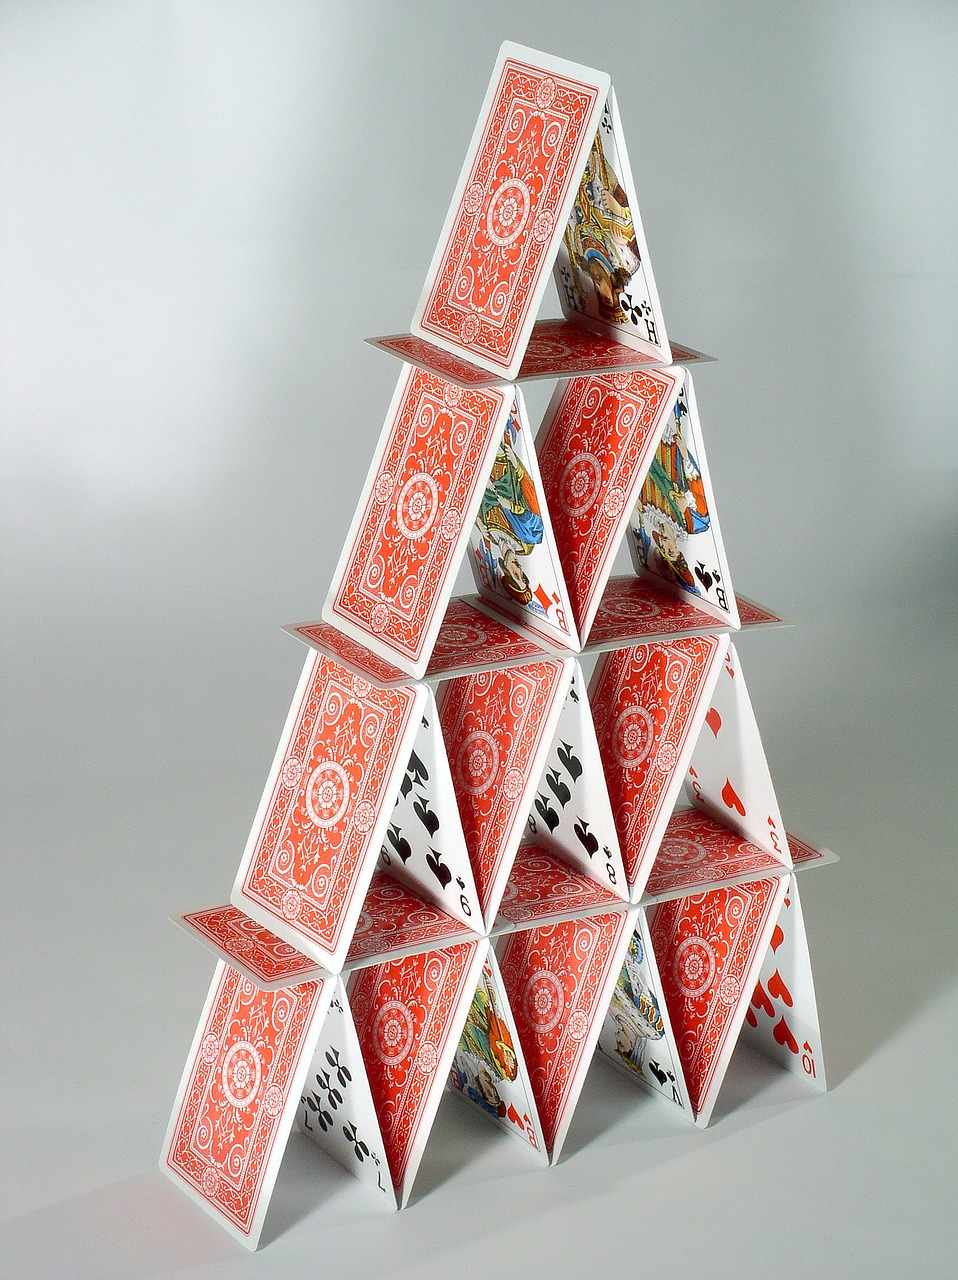 house of cards fragile patience free photo